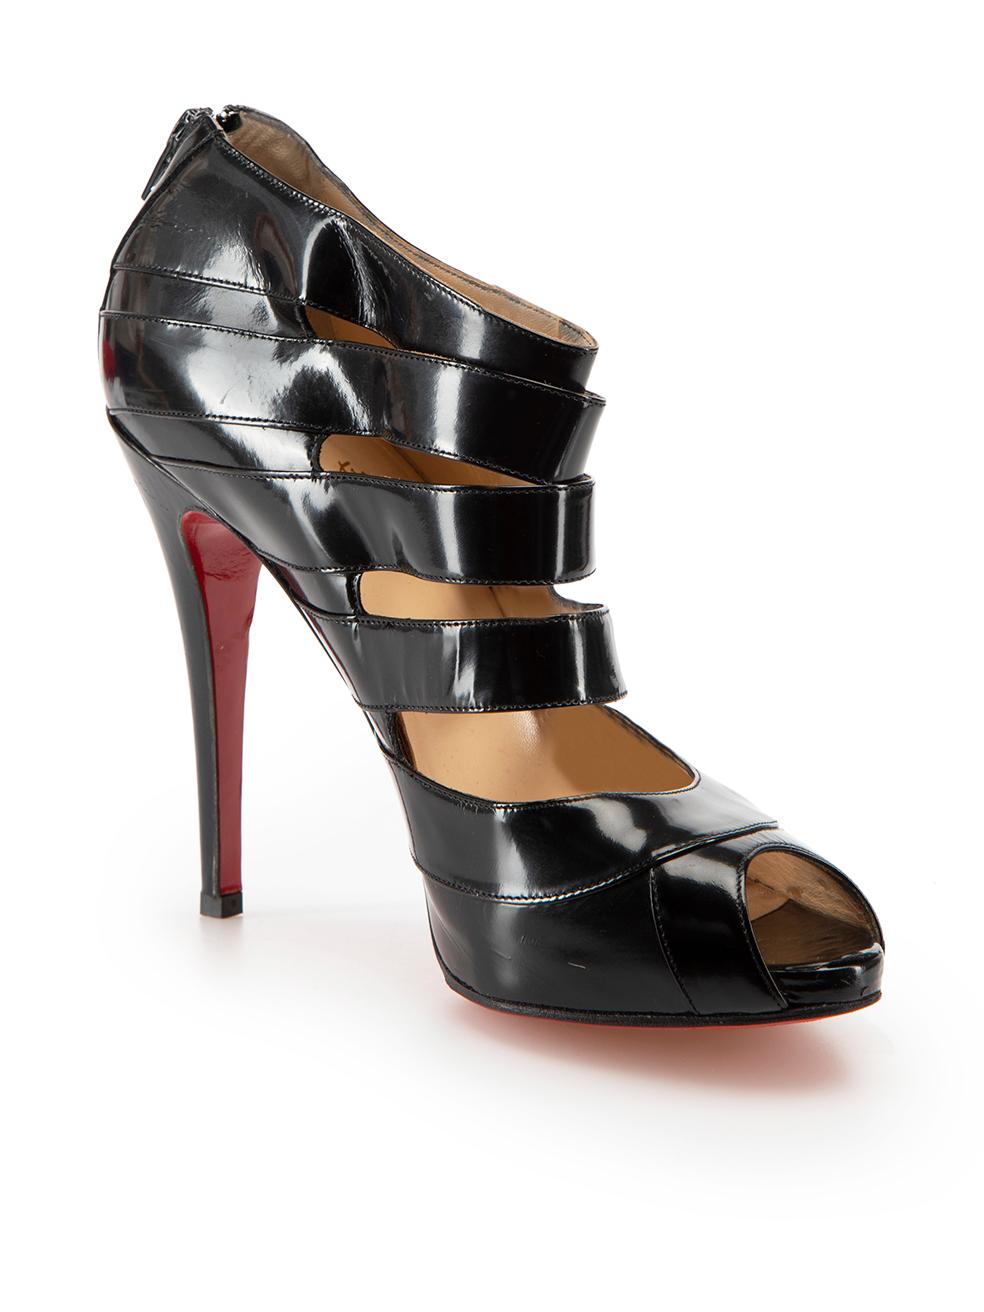 CONDITION is Good. General wear to heels is evident. Moderate signs of creasing to leather and scuff marks to heels and toe tips on this used Christian Louboutin designer resale item. Please note this item has been resoled and comes with